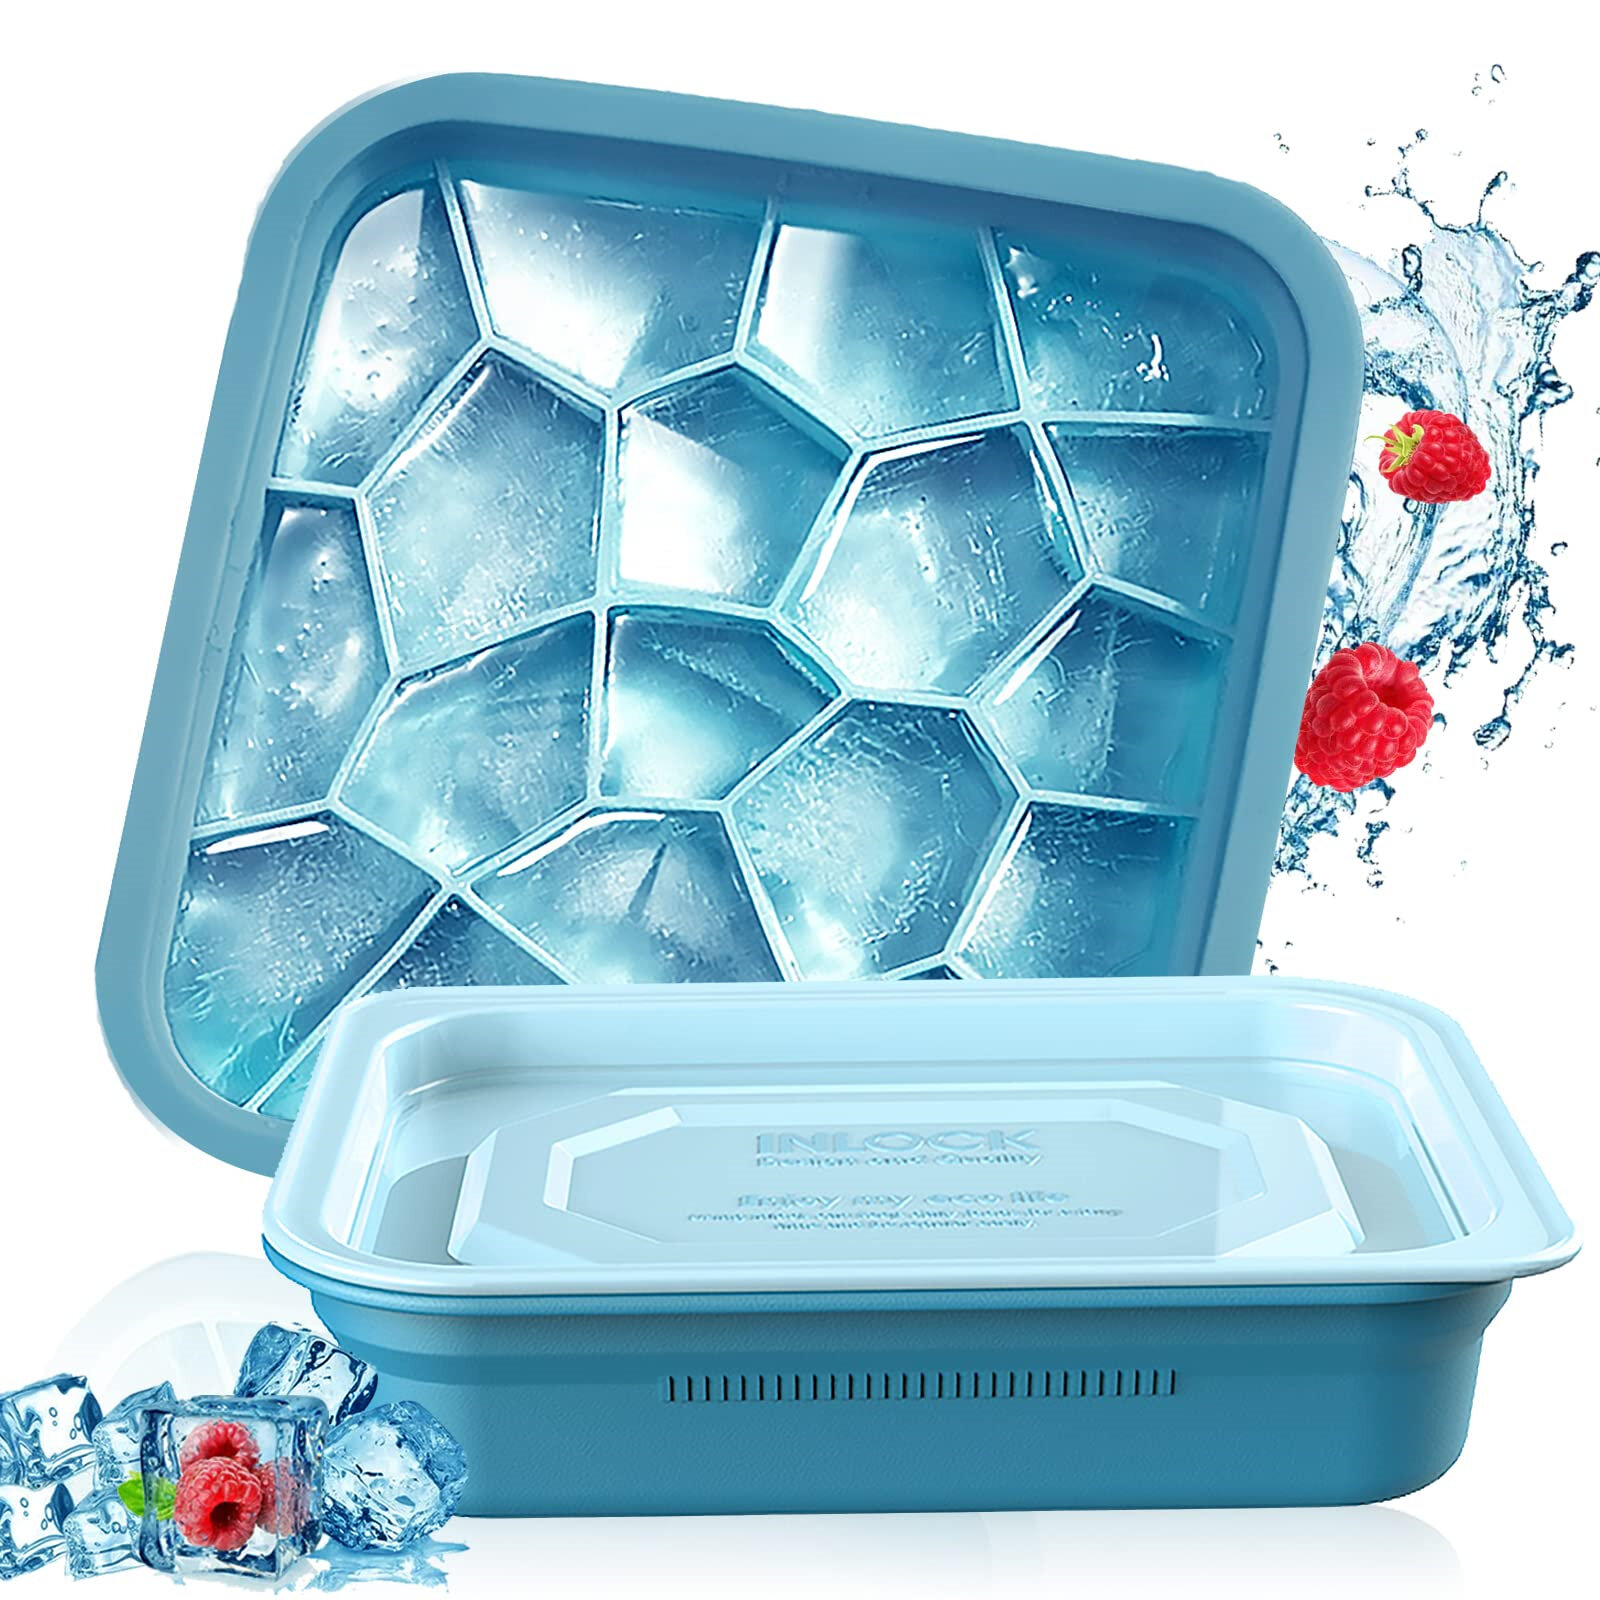 ICE CUBE TRAY MAKER SILICONE WITH REMOVABLE LID 2 4 6 PACK VARIOUS COLOR 3 